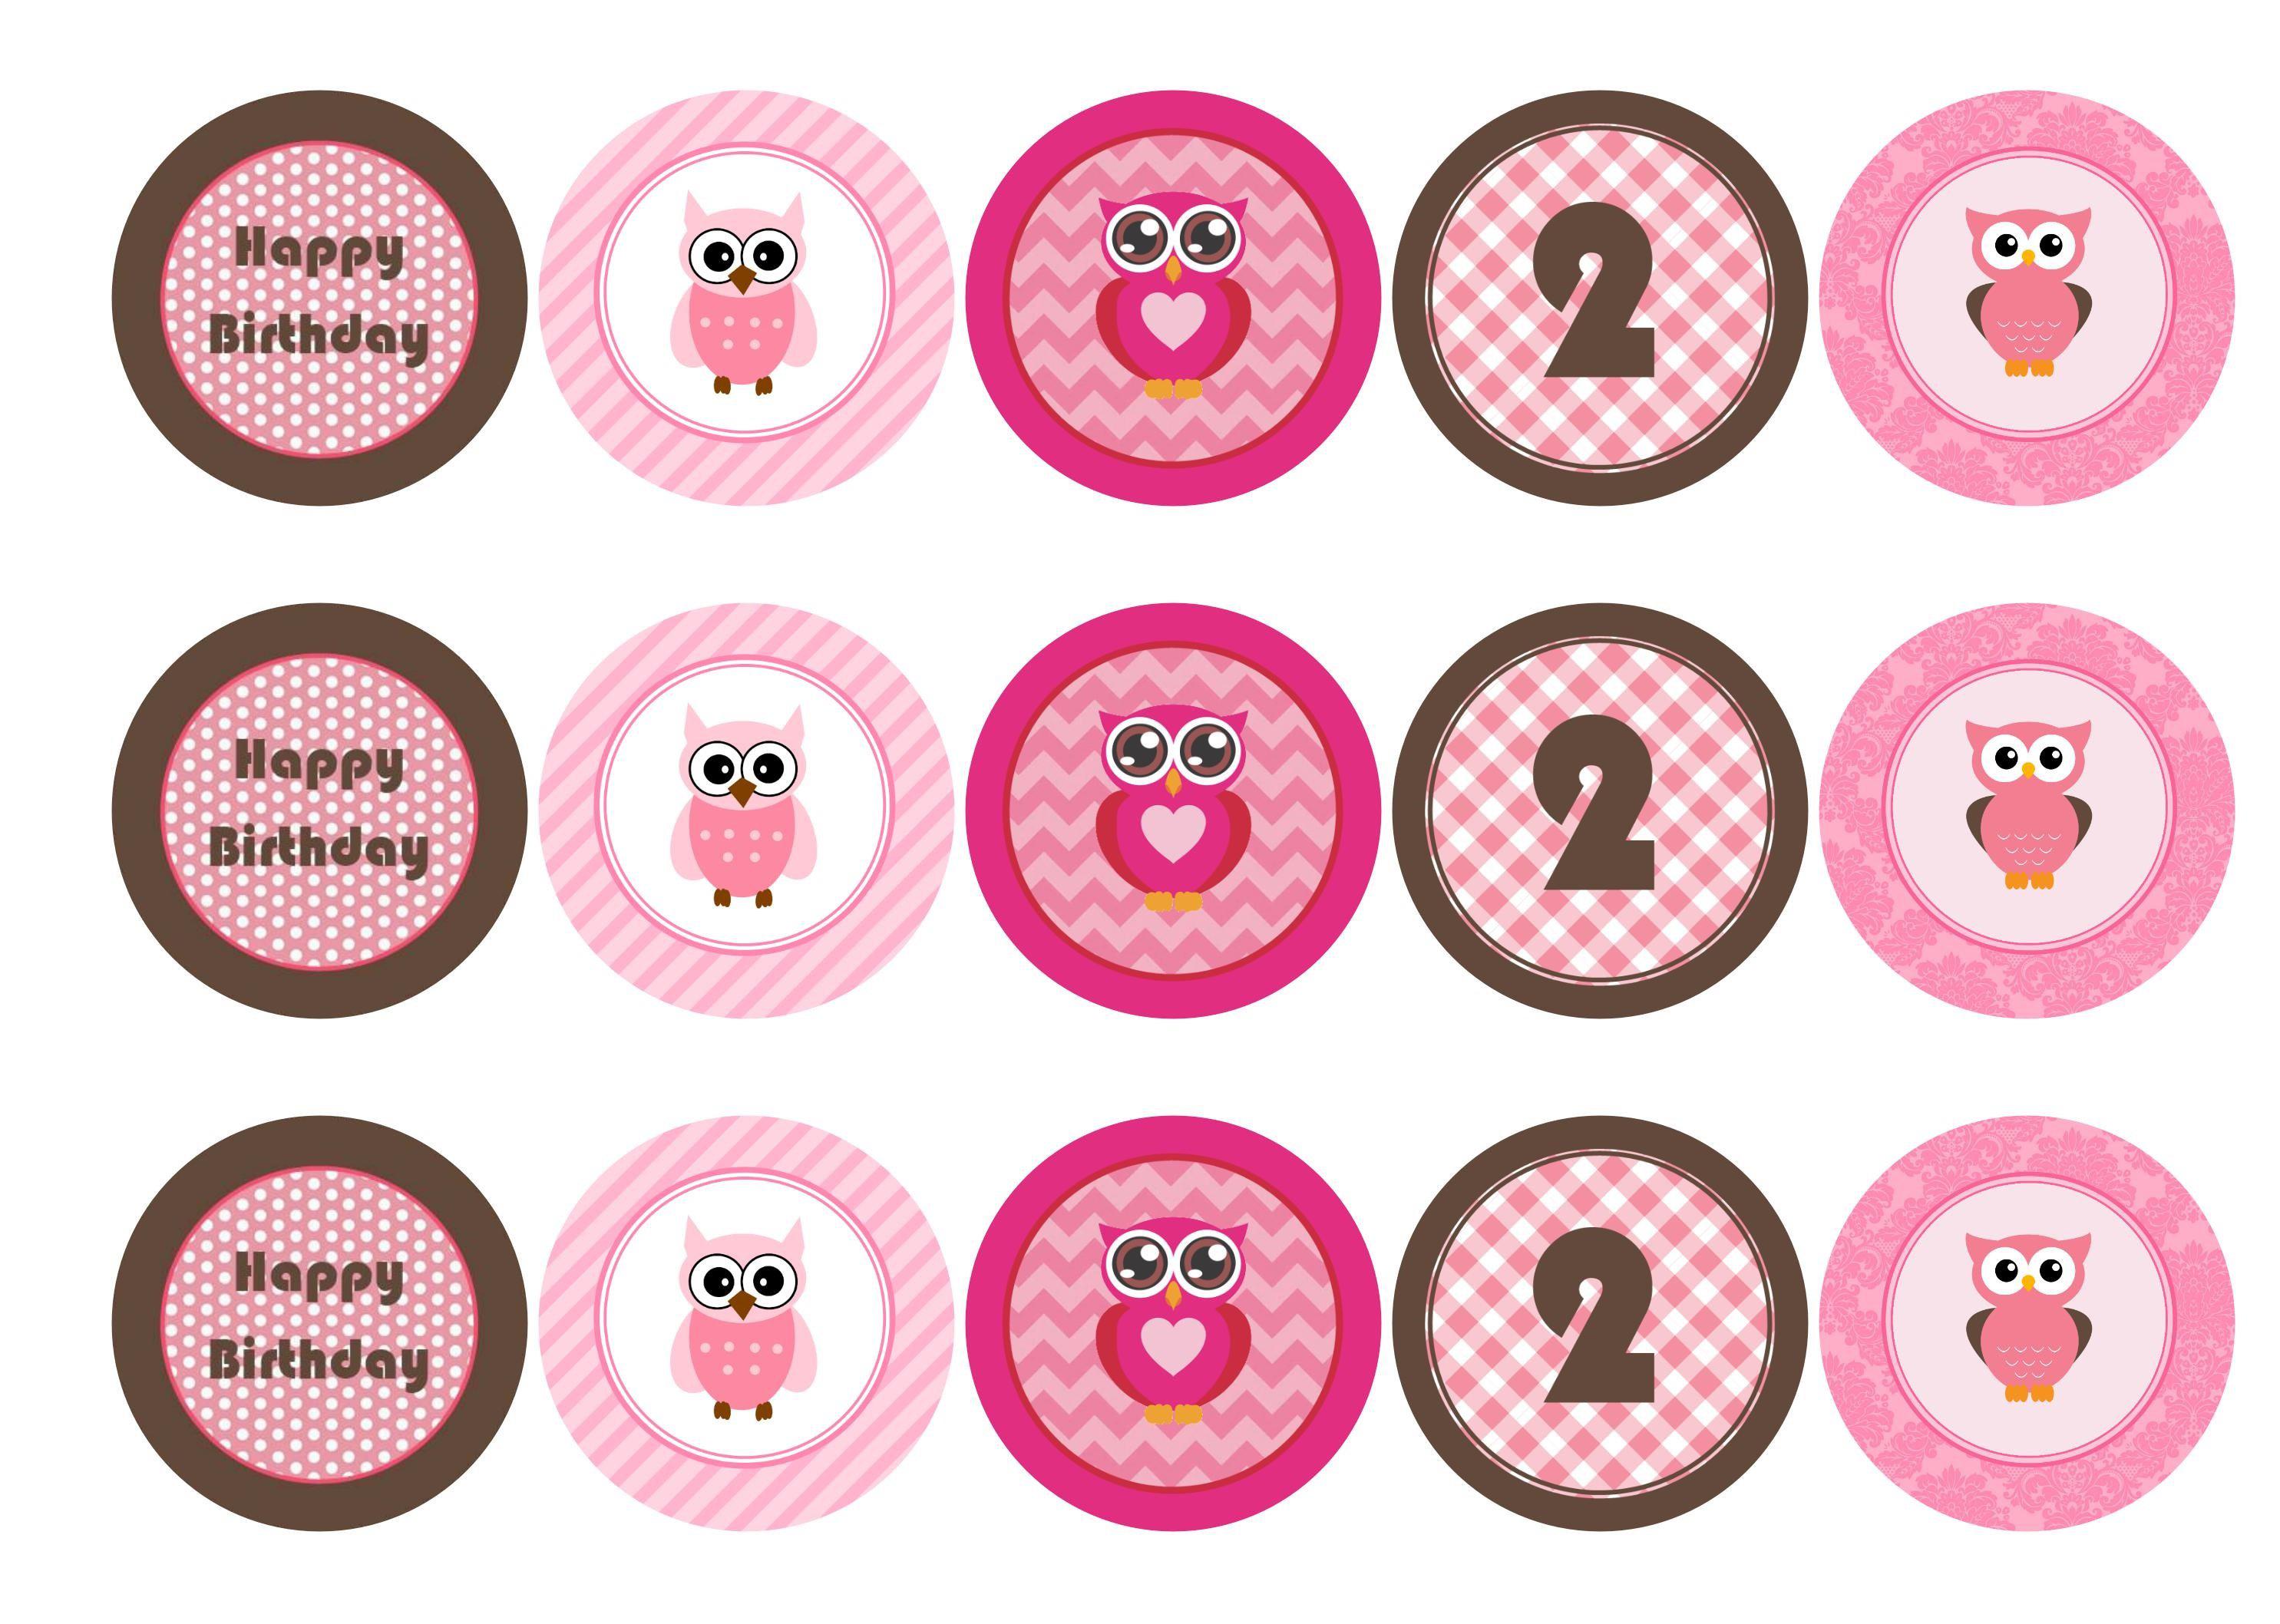 Printed edible cupcake toppers with pink owls